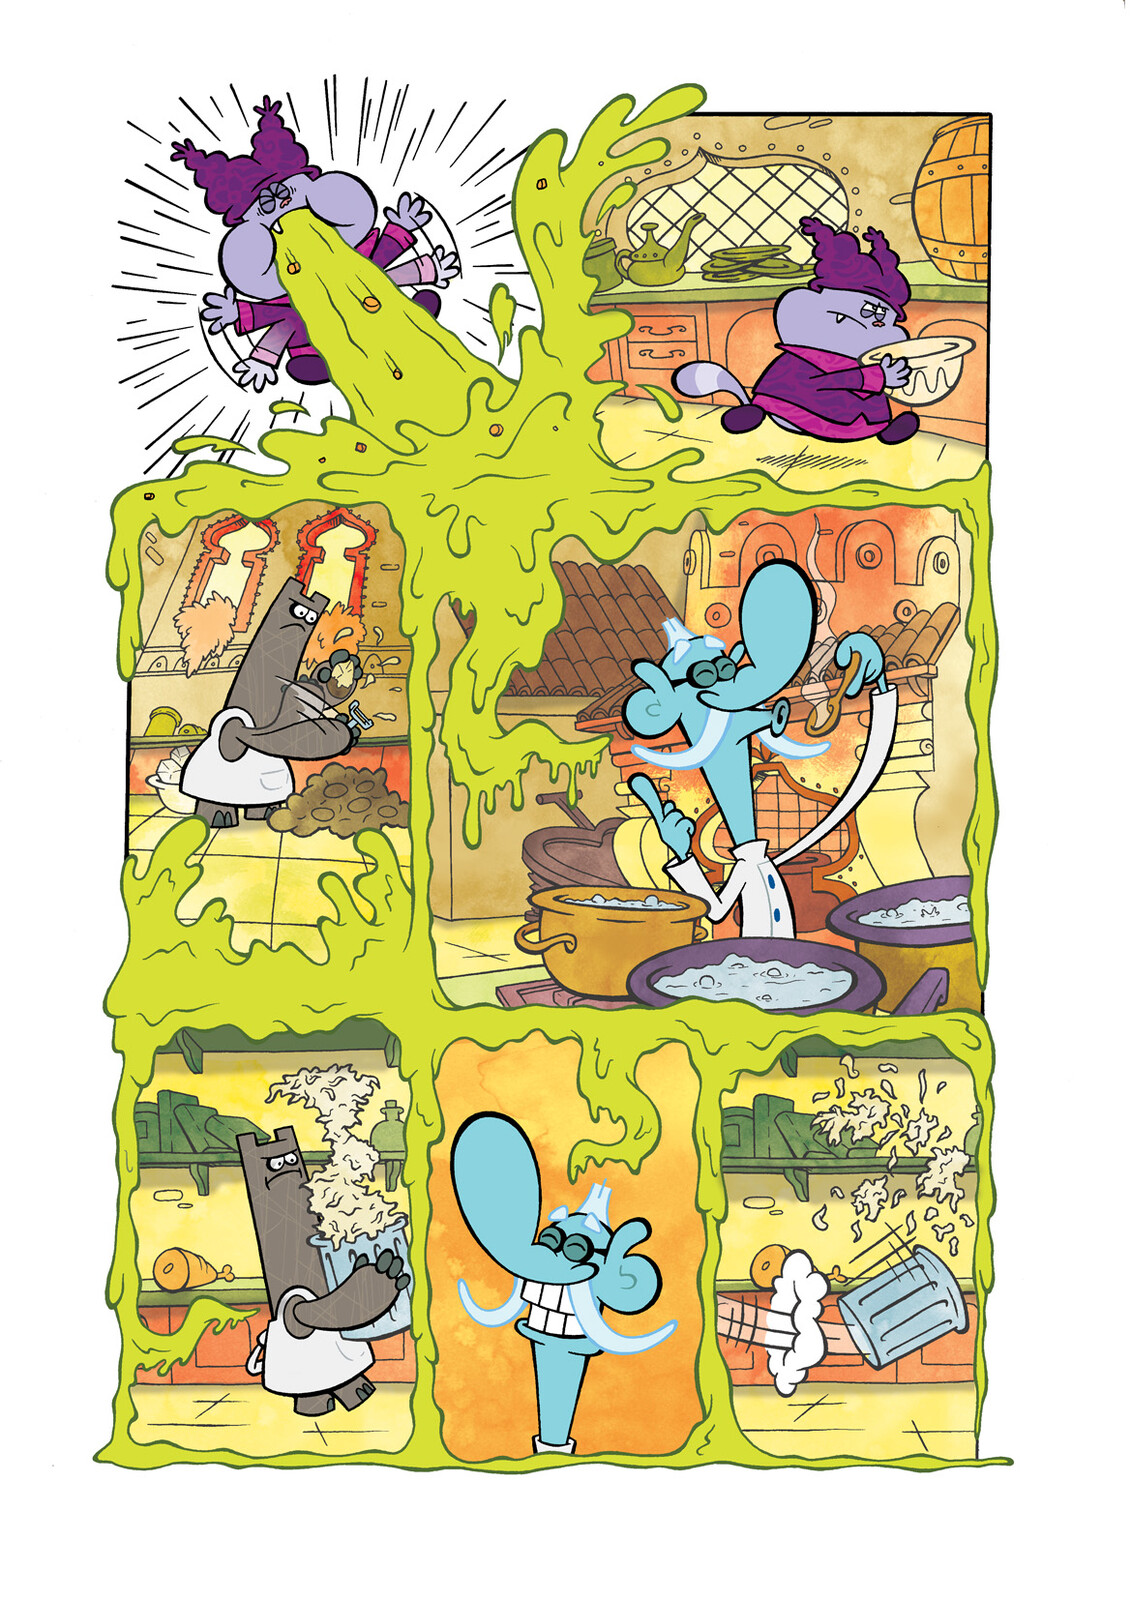 'Chowder' comic page excerpt for Skyjack Publishing.